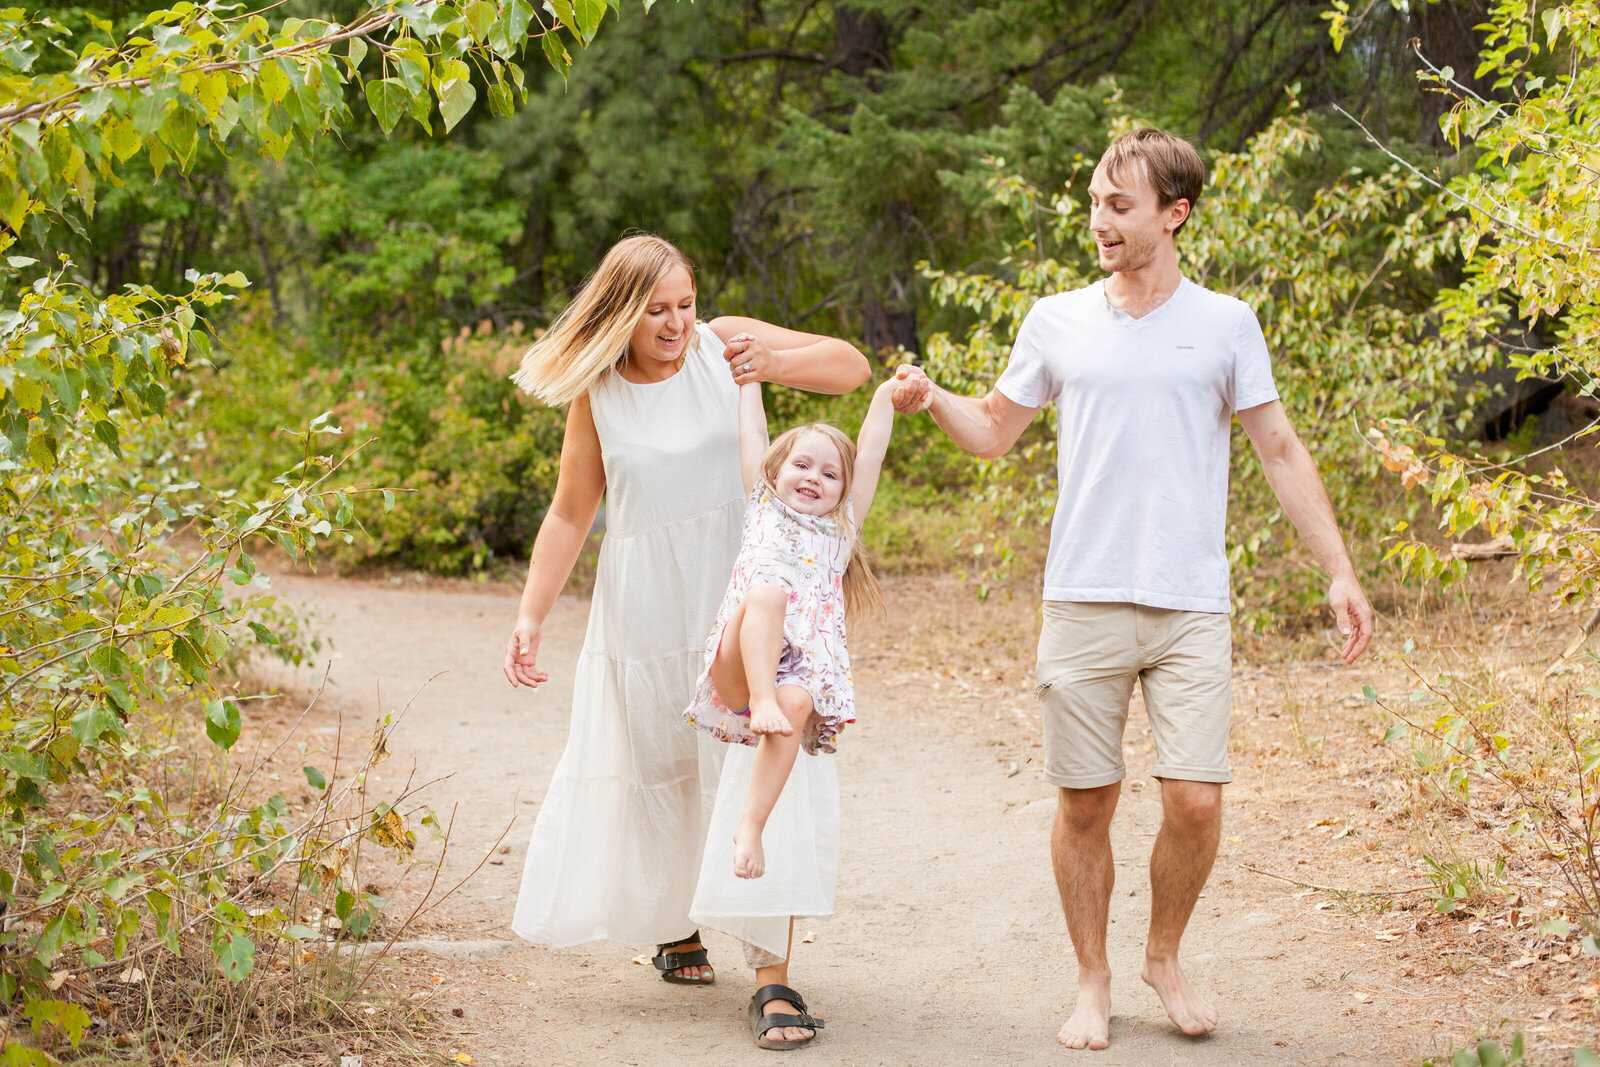 A husband and wife playing with their child on a trail.